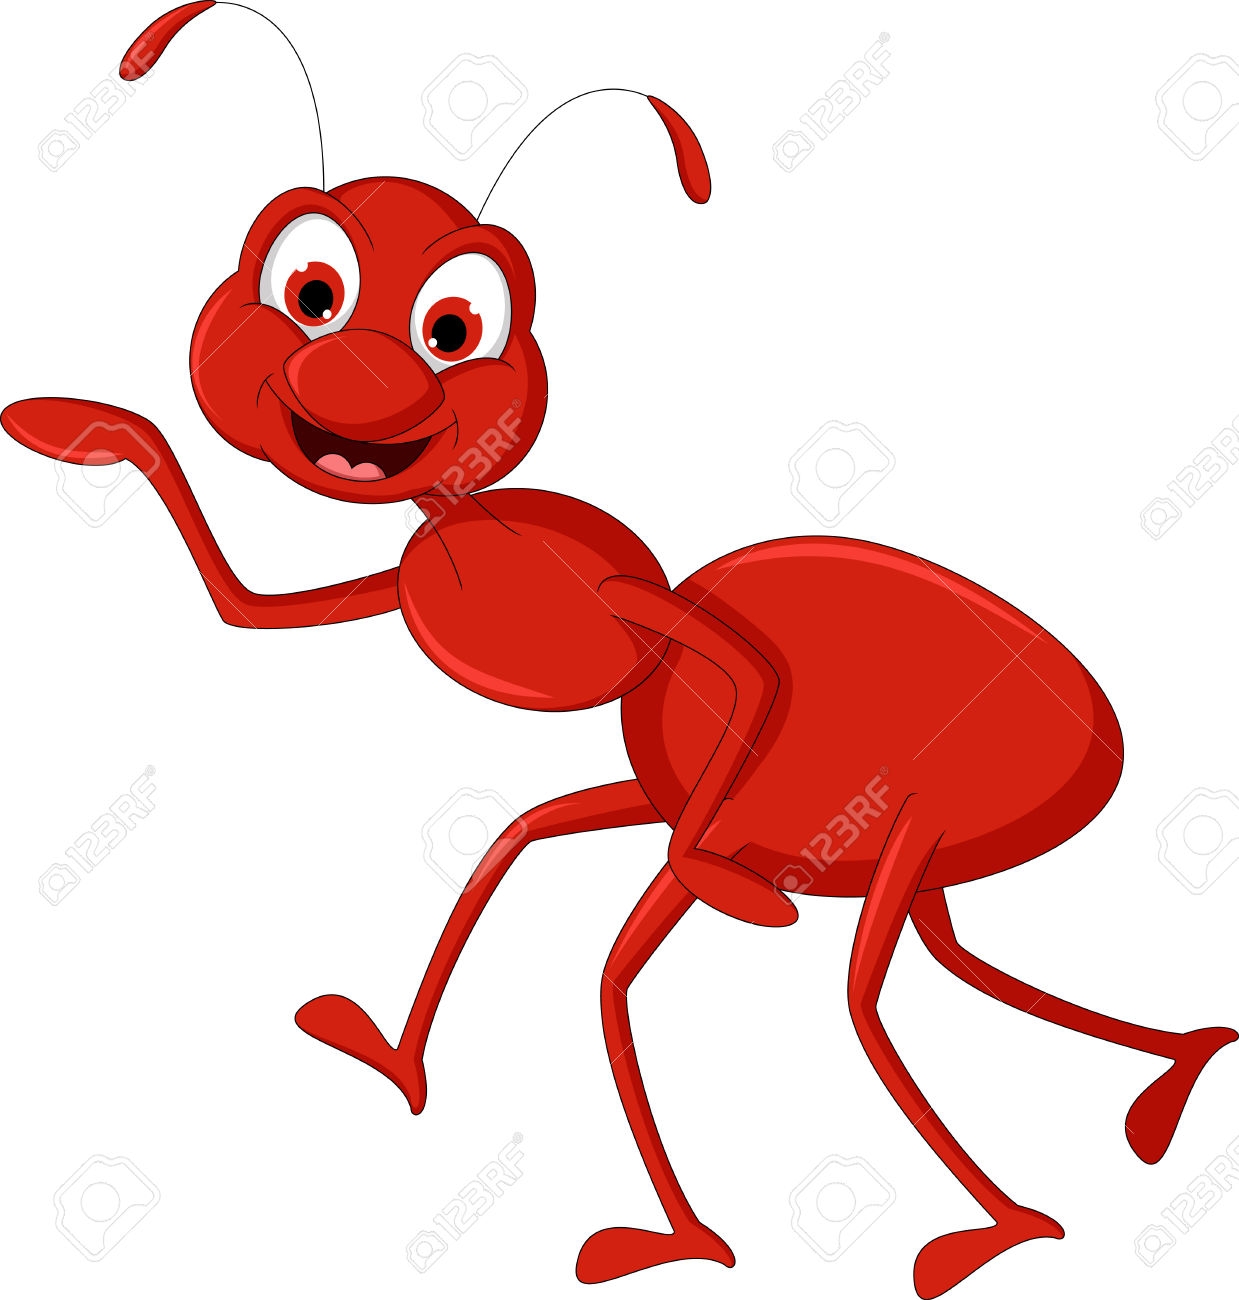 Ants clipart animation. Awesome collection digital g